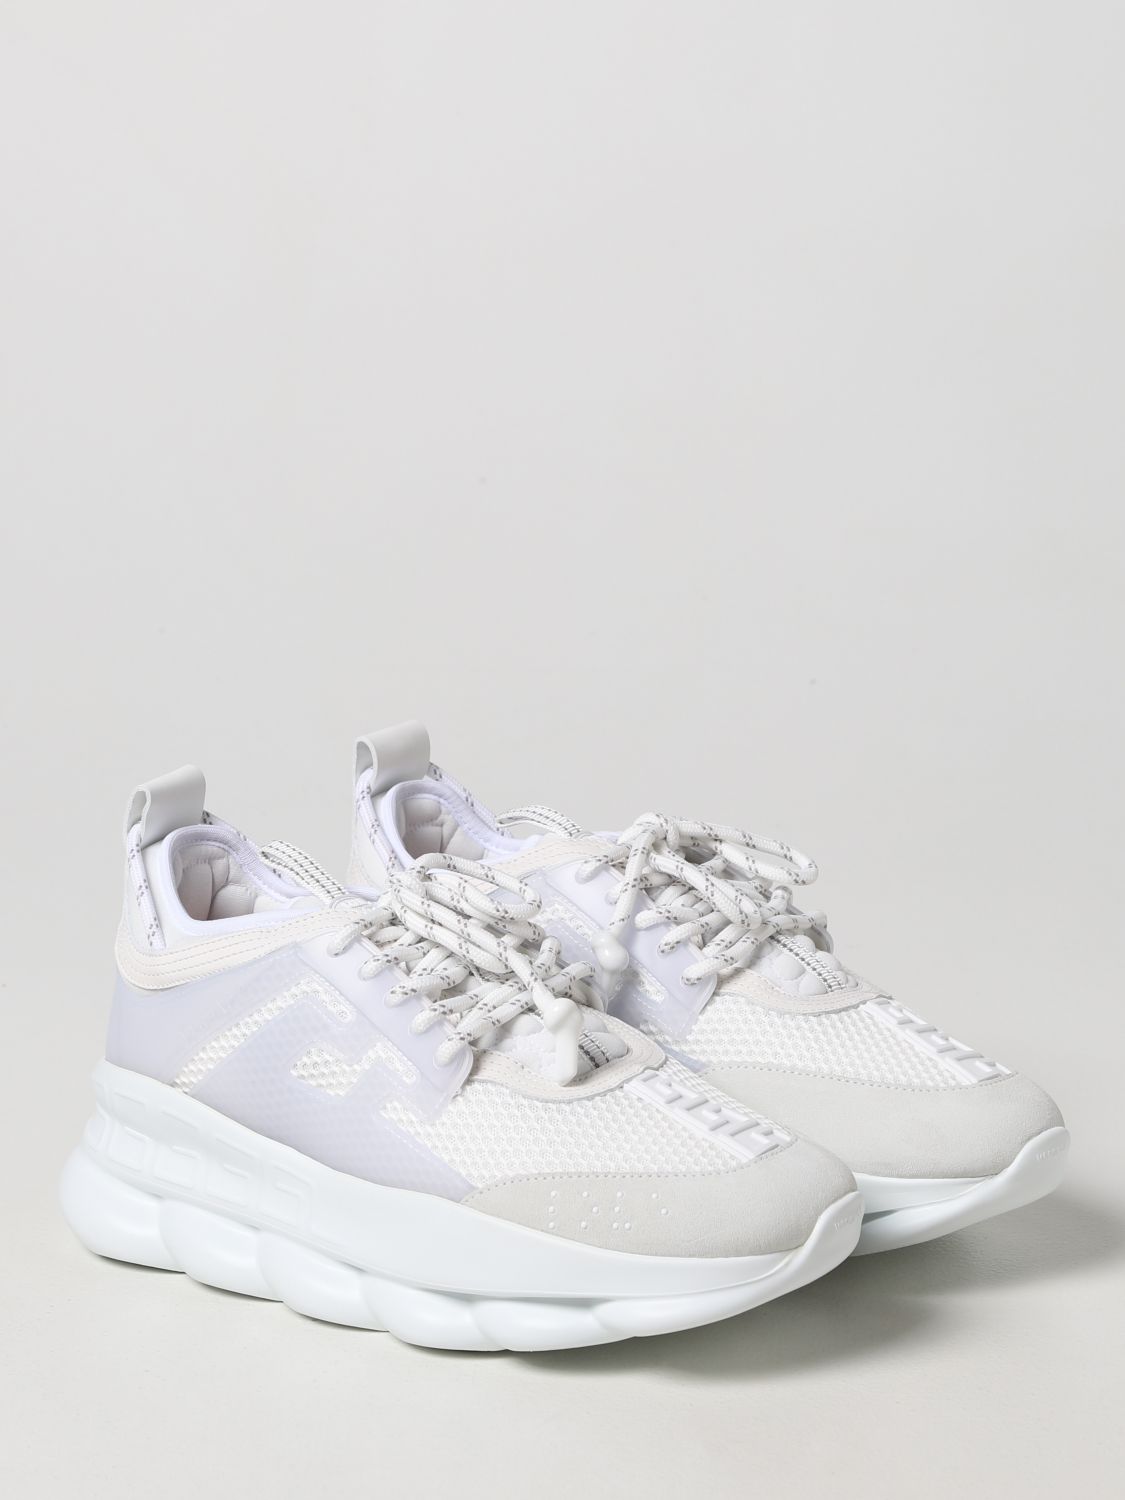 VERSACE: Chain Reaction fabric and leather sneakers - White 